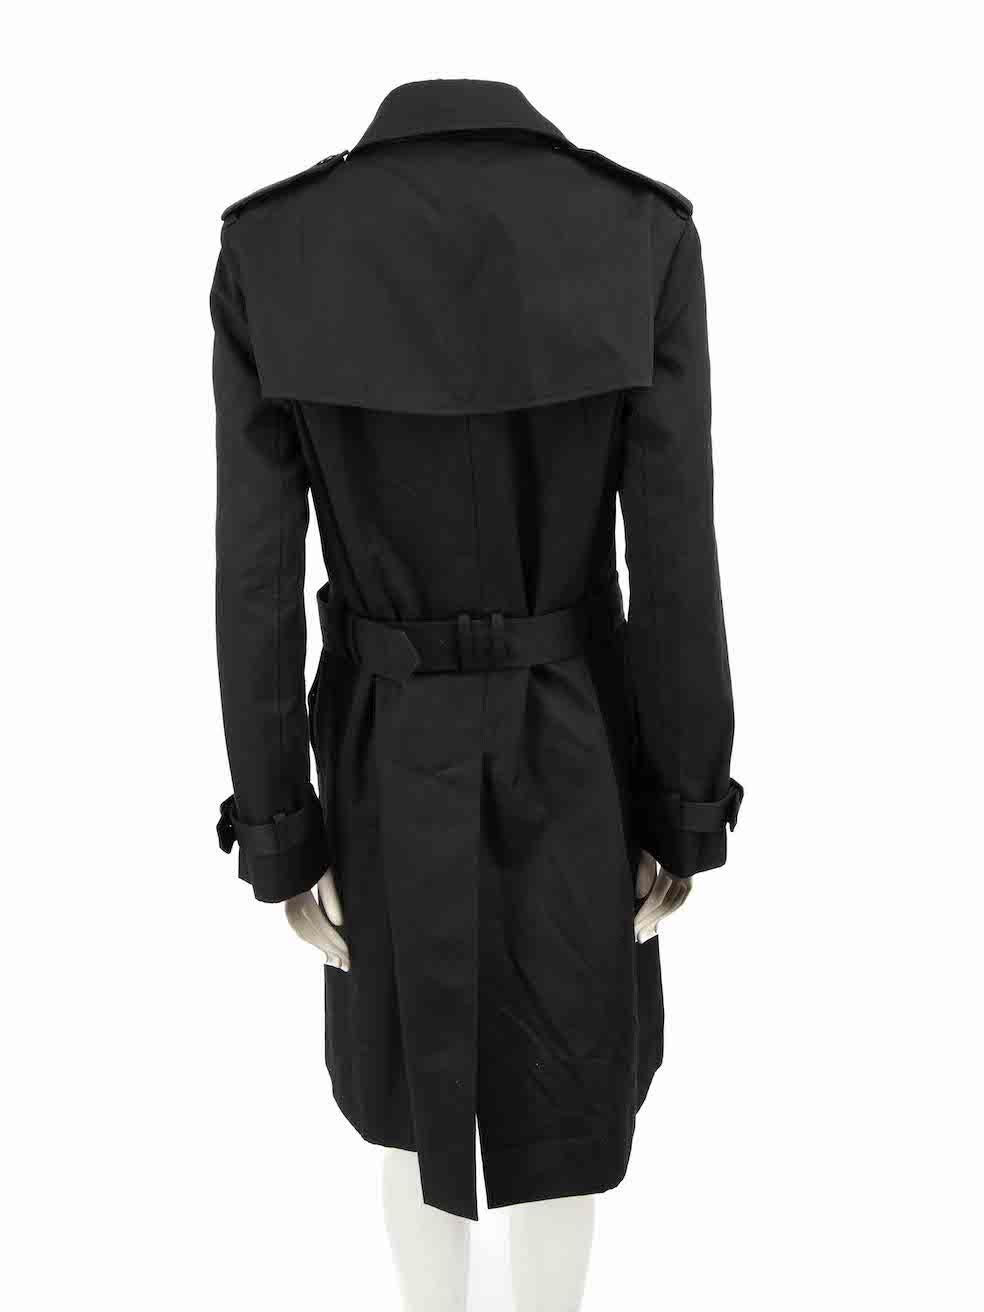 Saint Laurent Black Double-Breasted Belted Trench Coat Size XL In Excellent Condition For Sale In London, GB